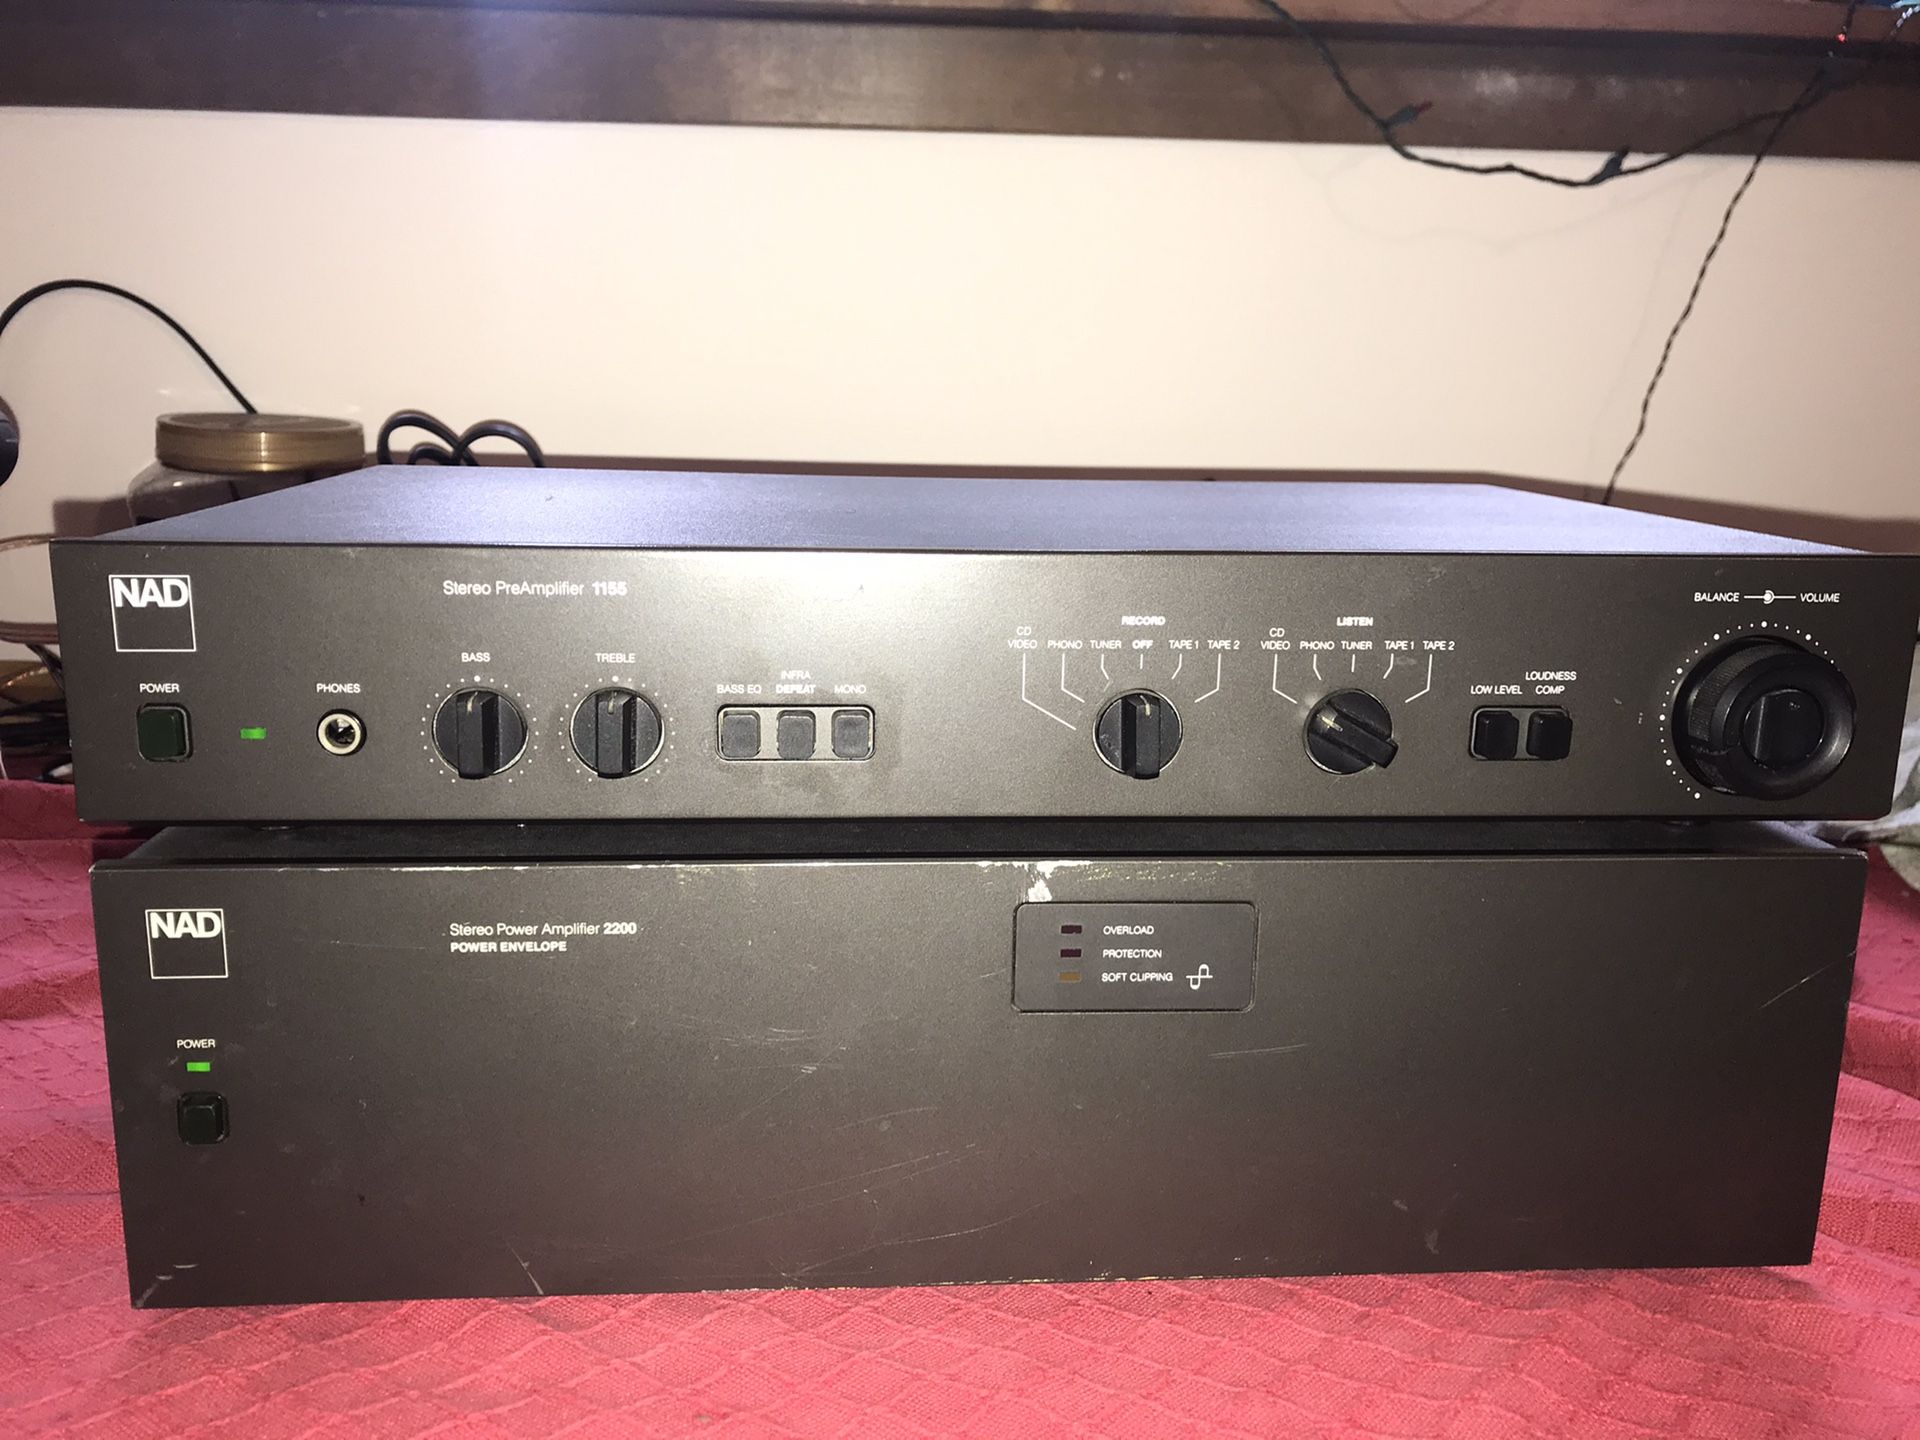 Nad 2200 Stereo Amplifier and Nad 1155 pre-amp